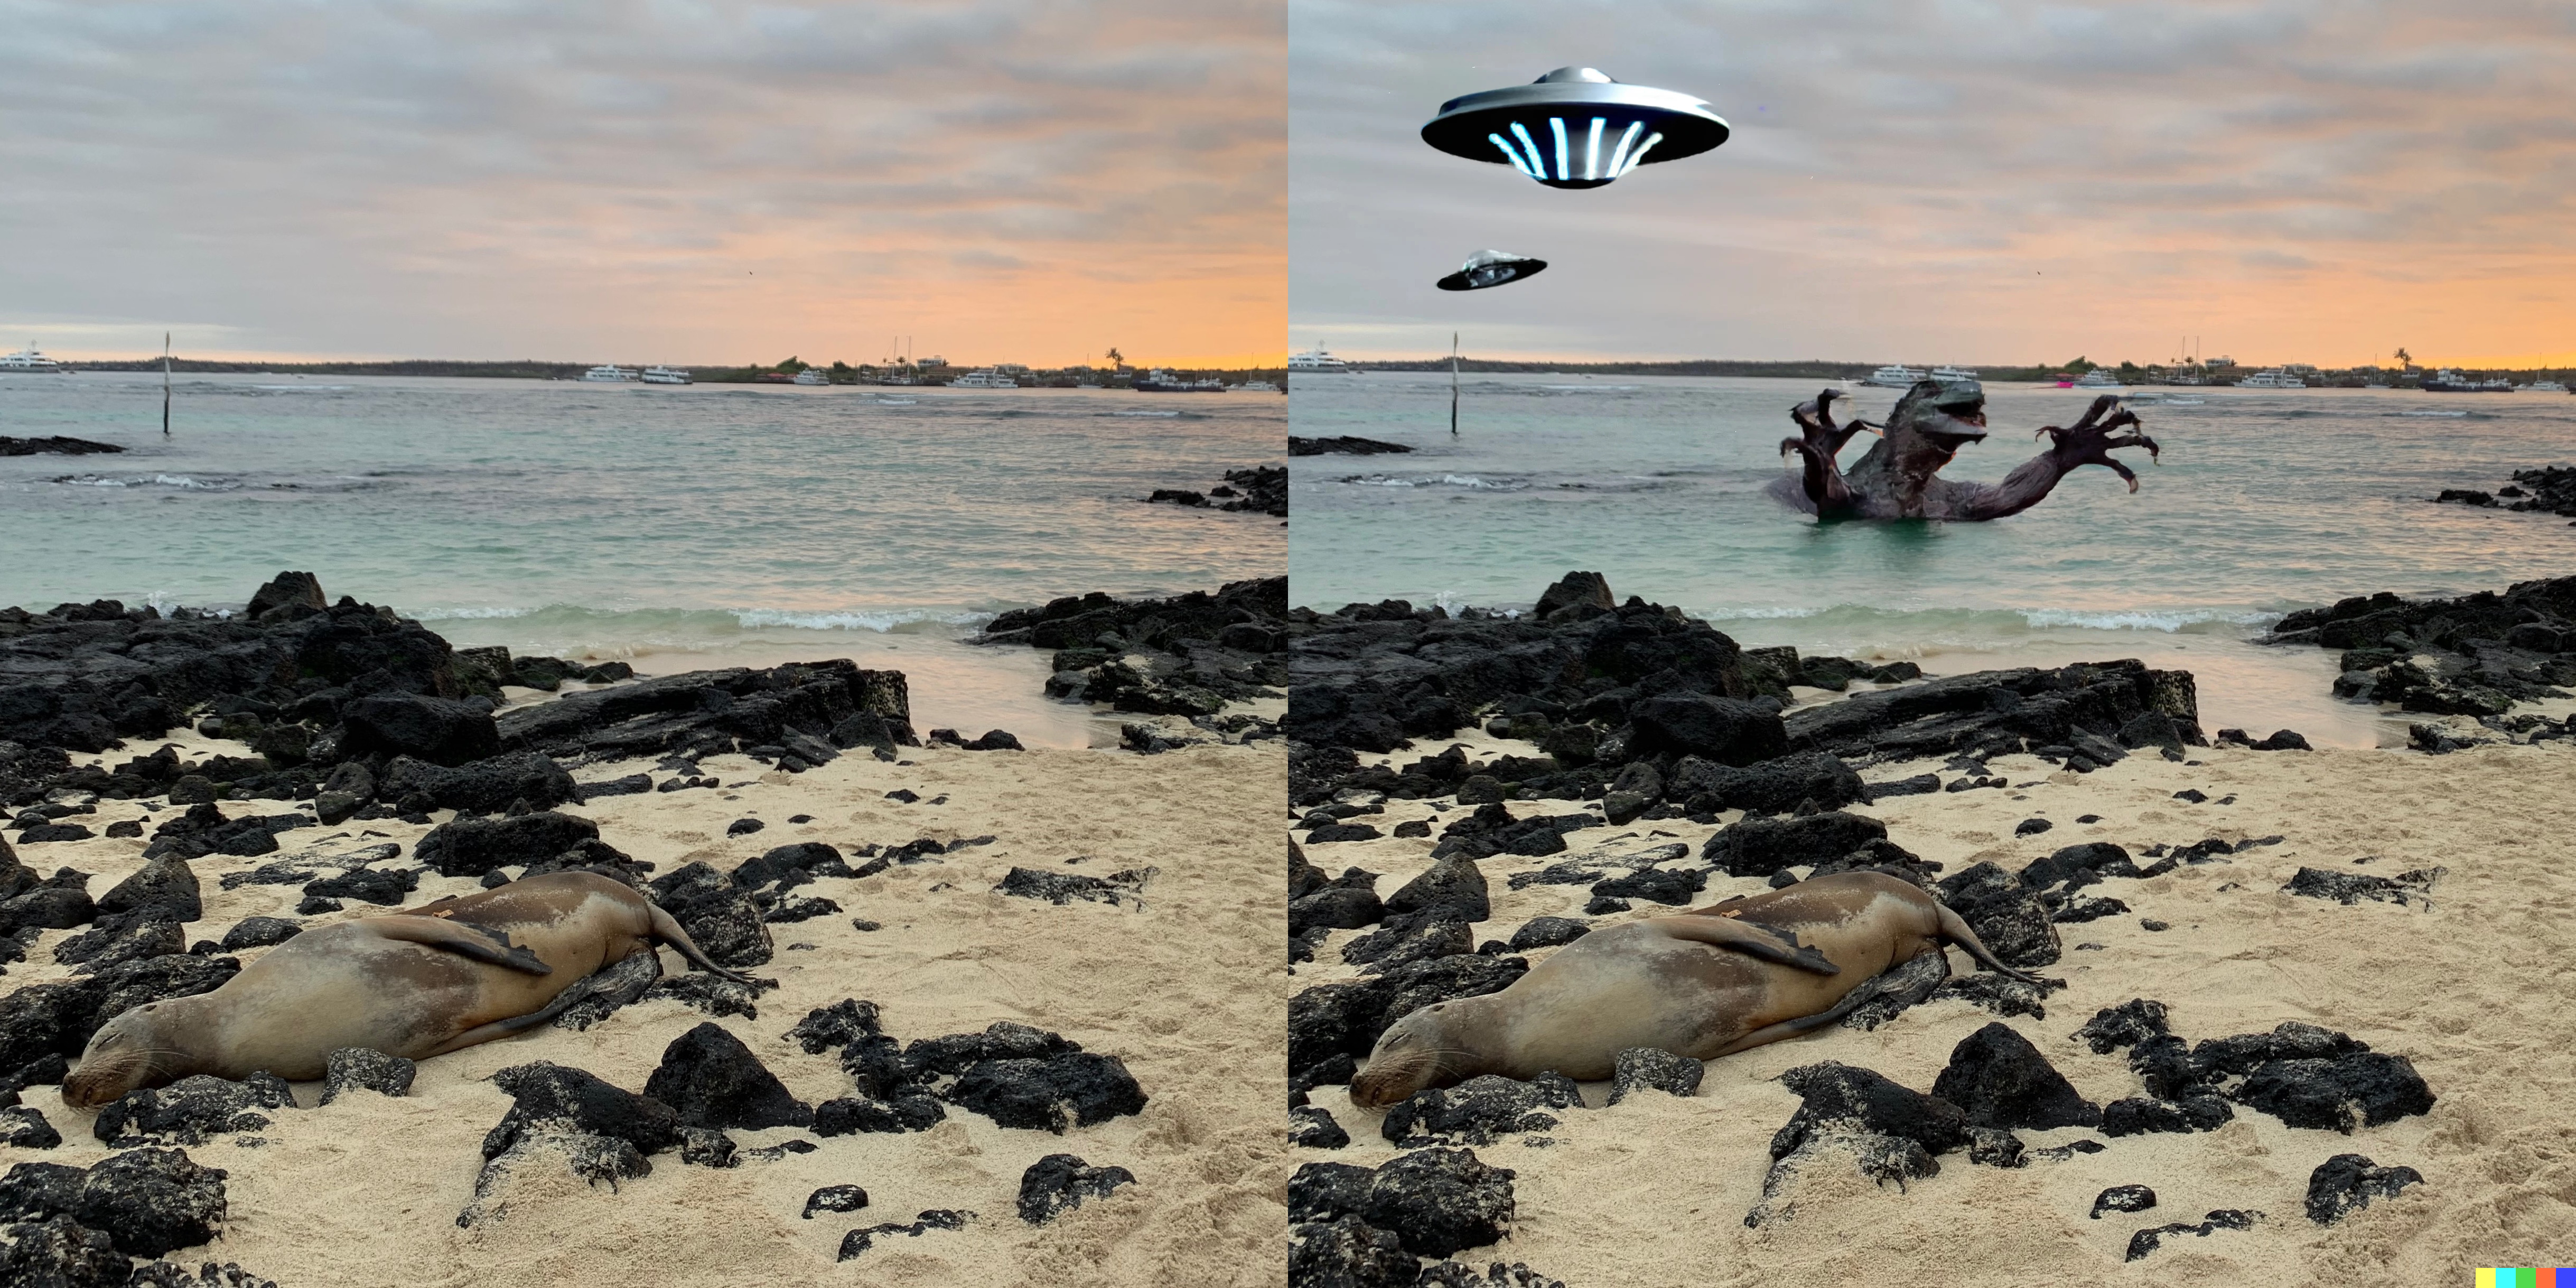 left: a sea lion sleeping on the beach at sunset; right: the same image with UFOs in the sky and a sea monster in the water